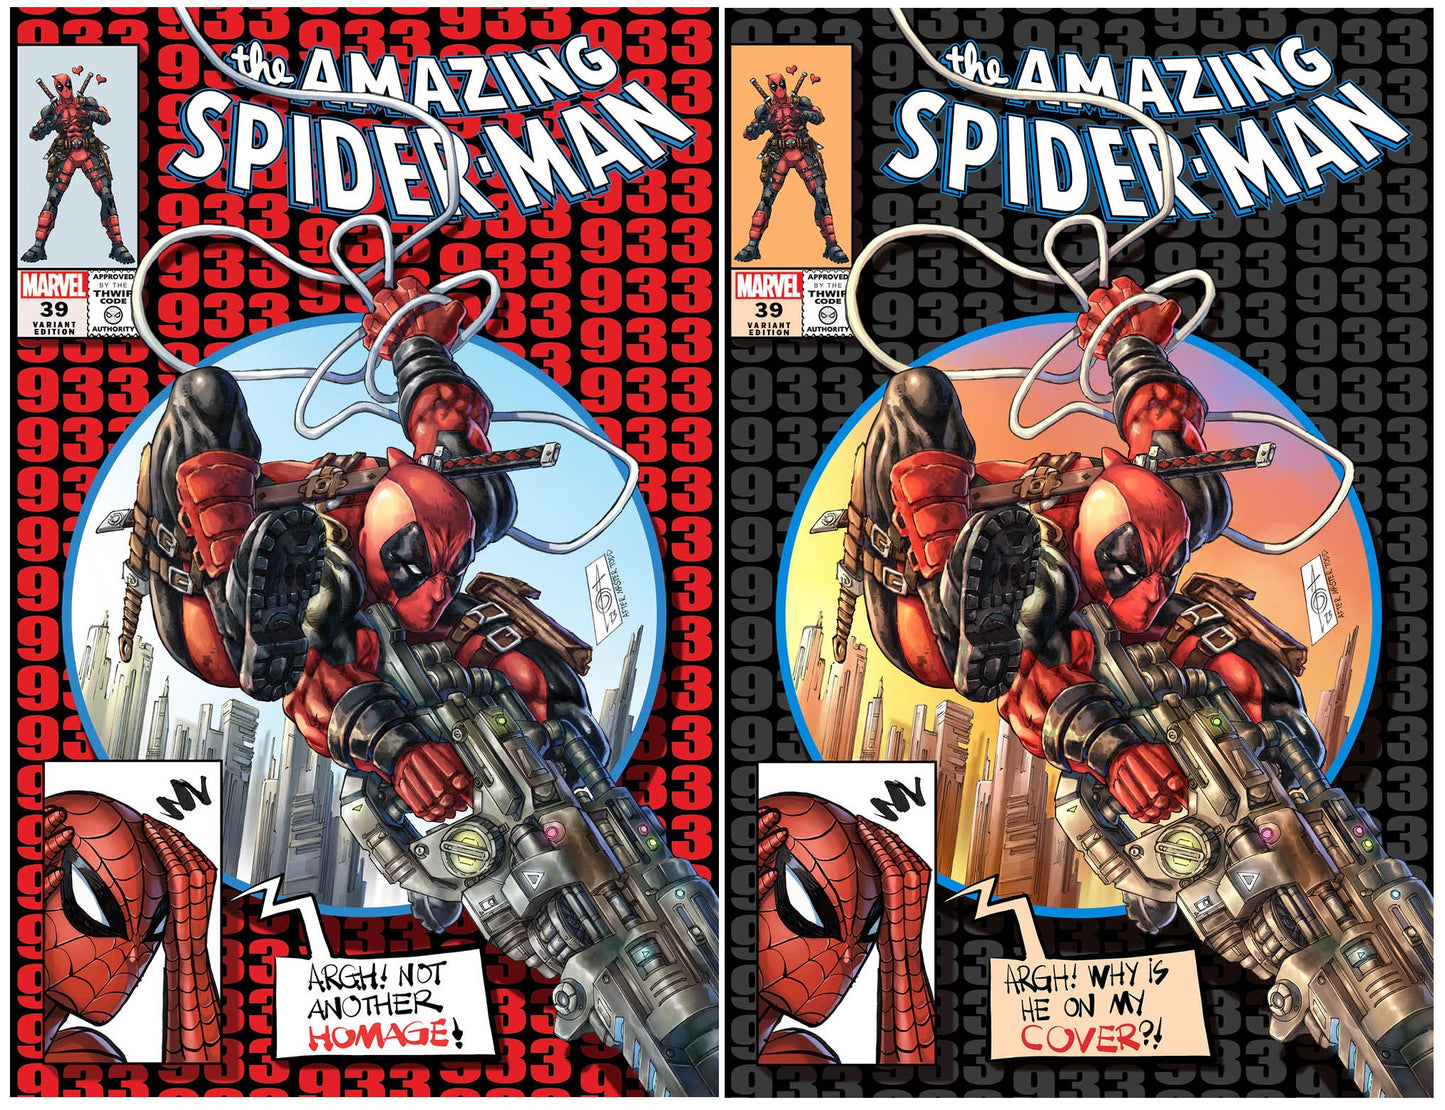 AMAZING SPIDER-MAN #39 ALAN QUAH RED/SILVER TRADE DRESS ANTI-HOMAGE VARIANT SET LIMITED TO 600 SETS WITH NUMBER COA